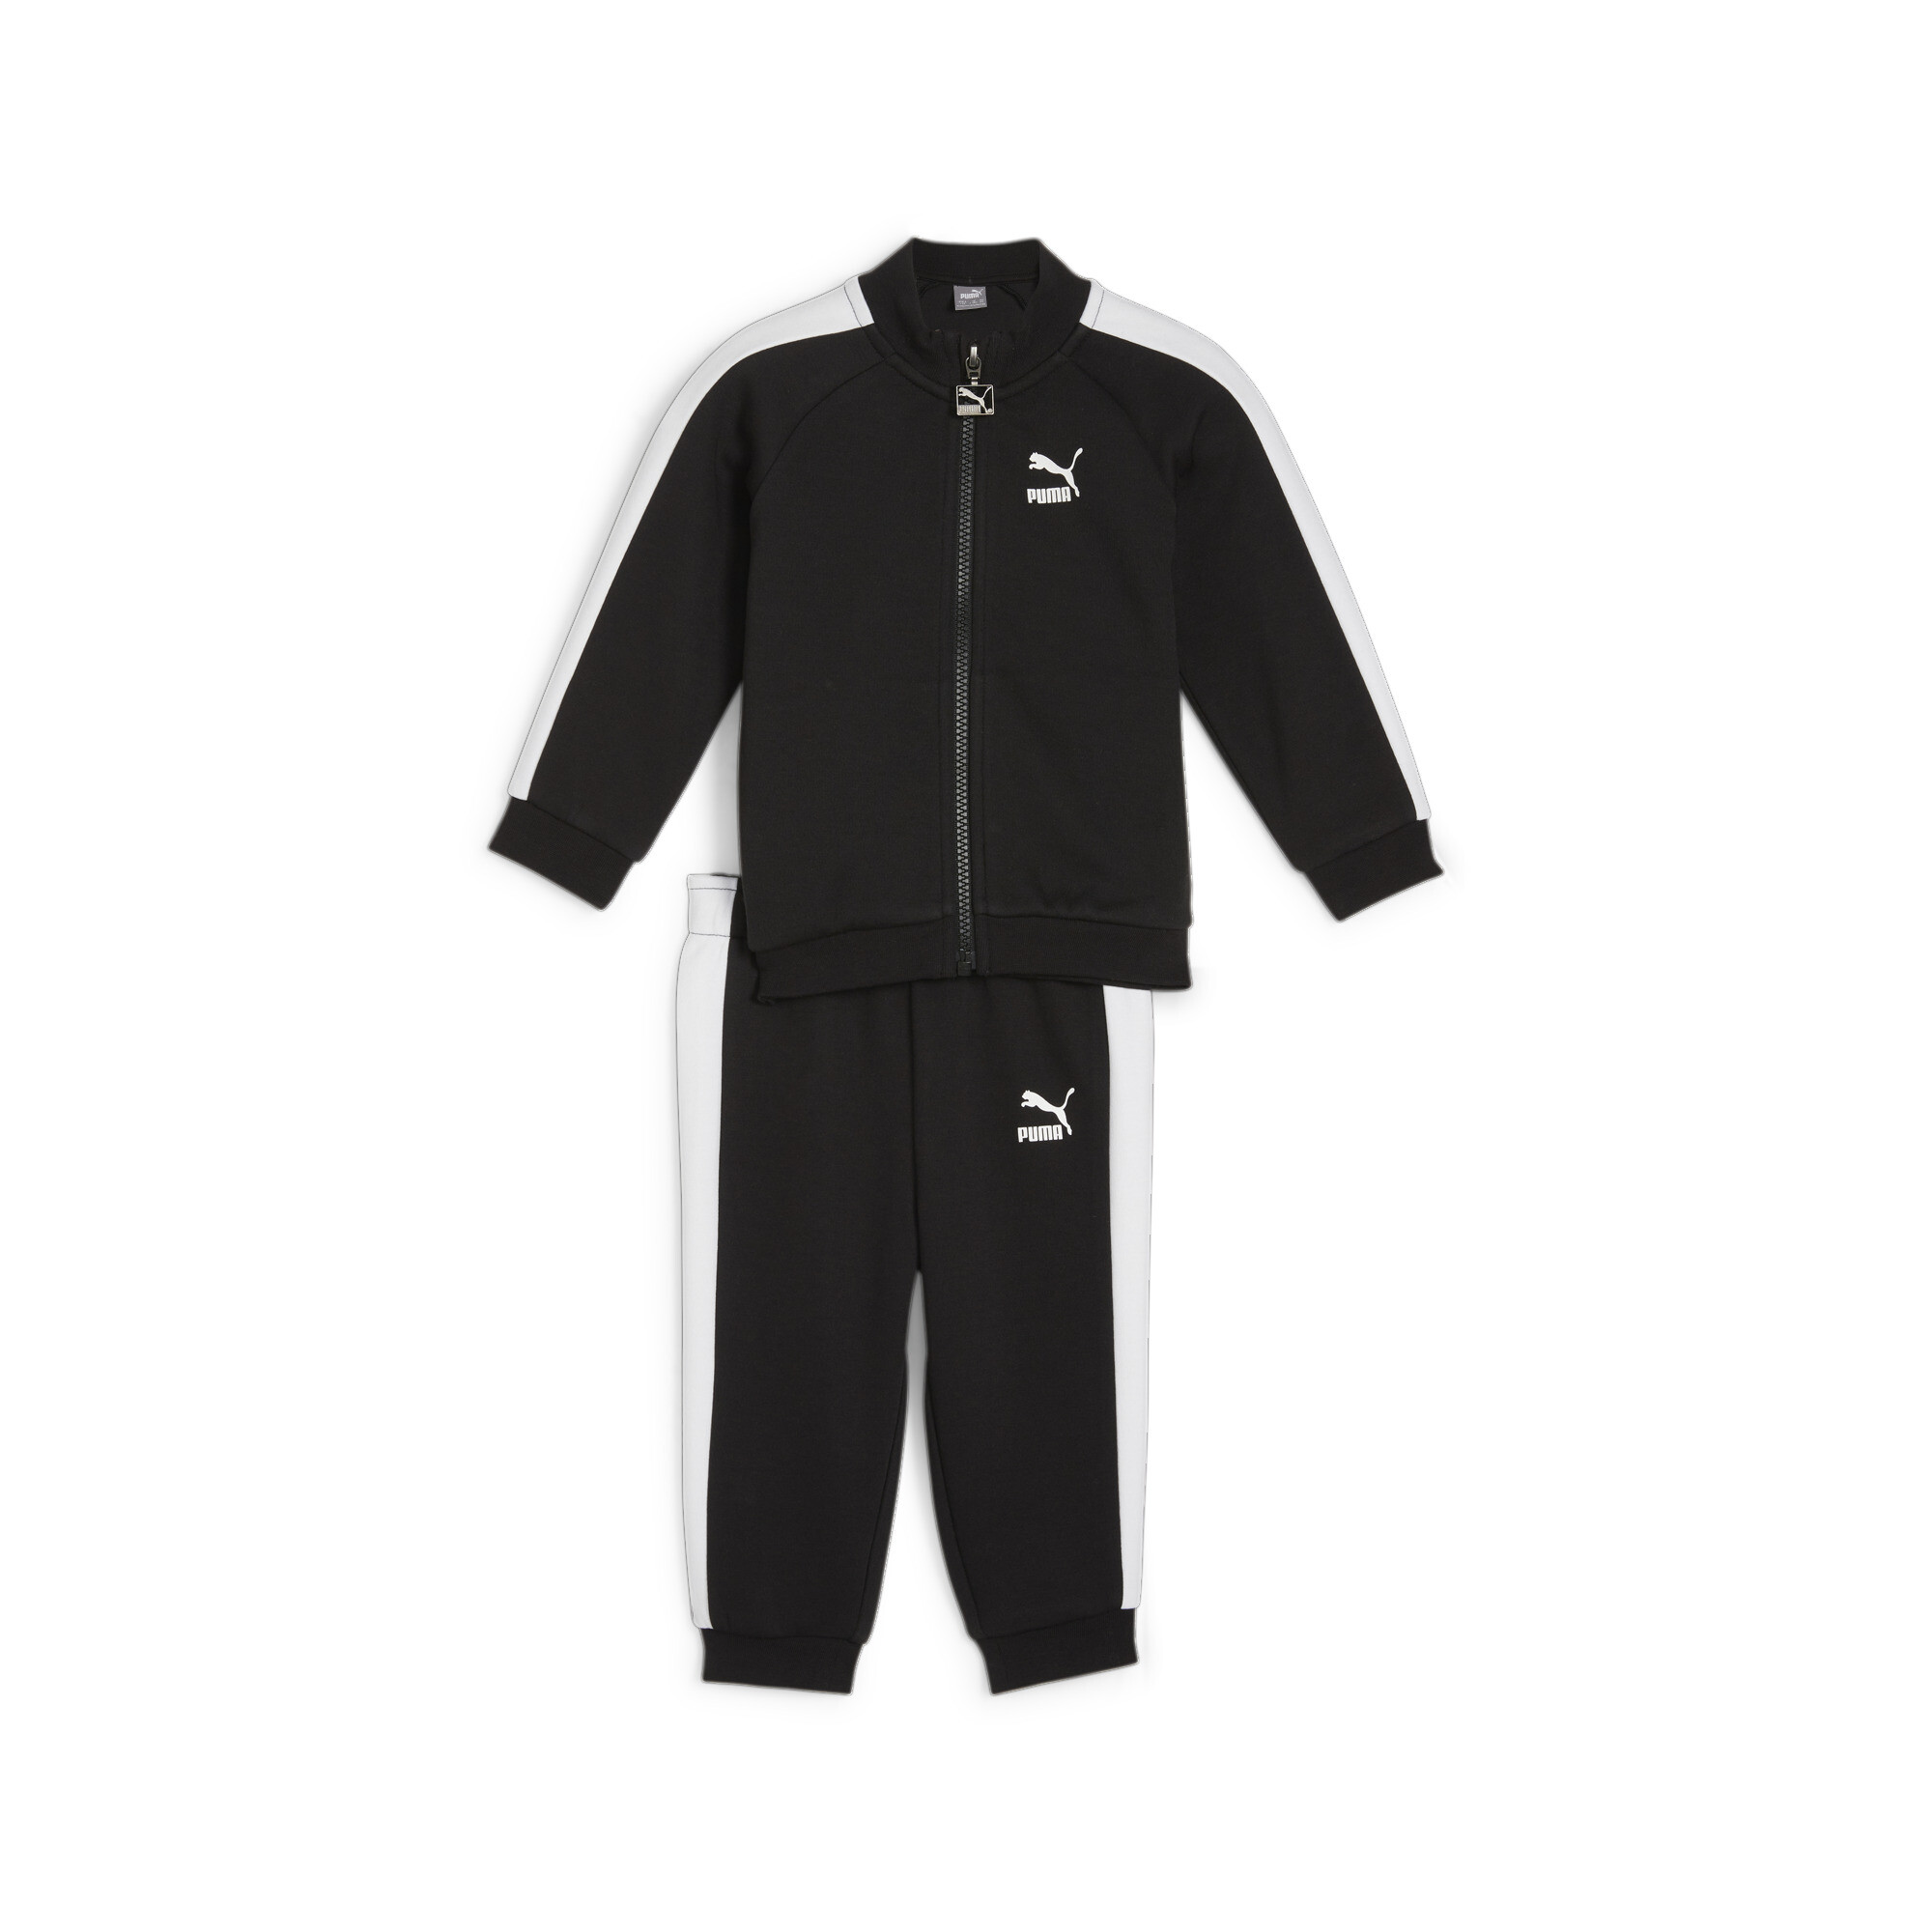 Kids' PUMA MINICATS T7 ICONIC Baby Tracksuit Set In 10 - Black, Size 12-18 Months